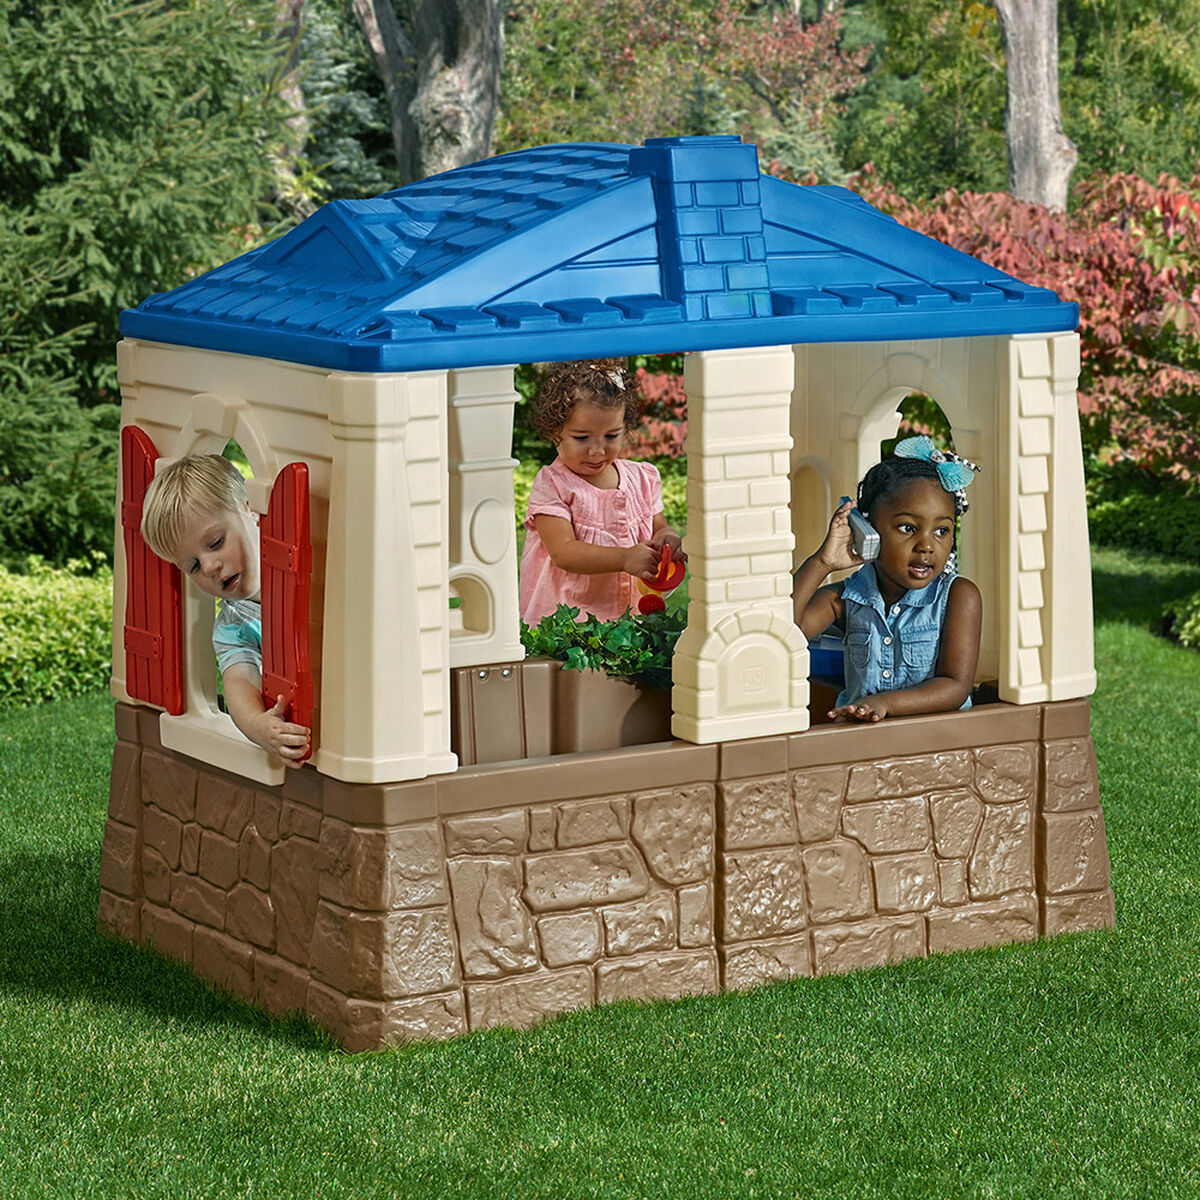 Children's play house Step 2 Neat & Tidy Cottage 118 x 130 x 89 cm